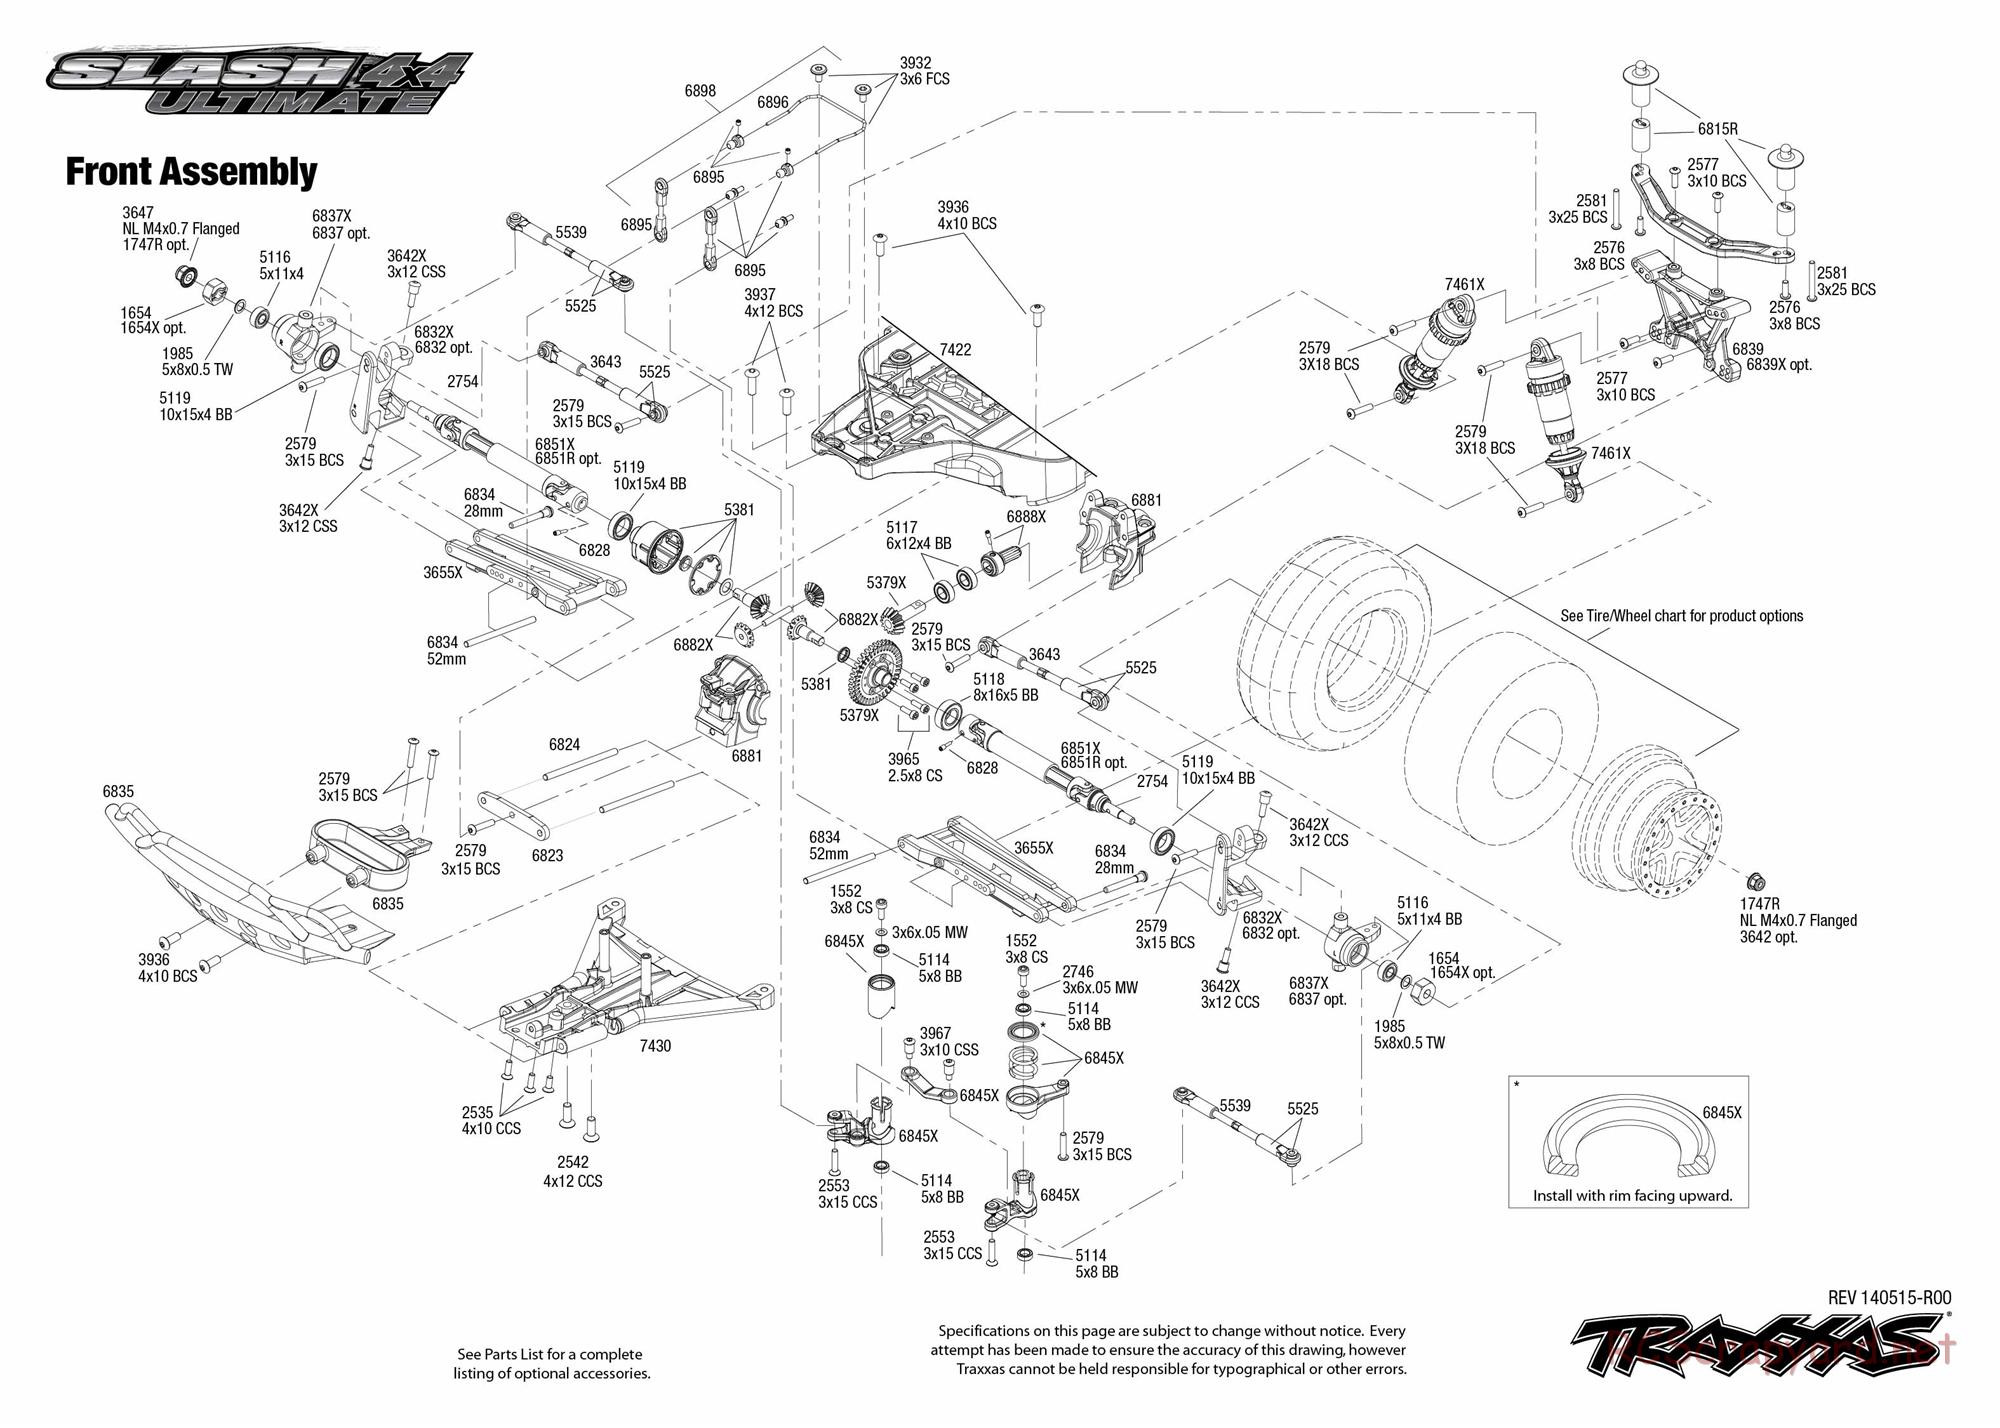 Traxxas - Slash 4x4 Ultimate (2014) - Exploded Views - Page 3